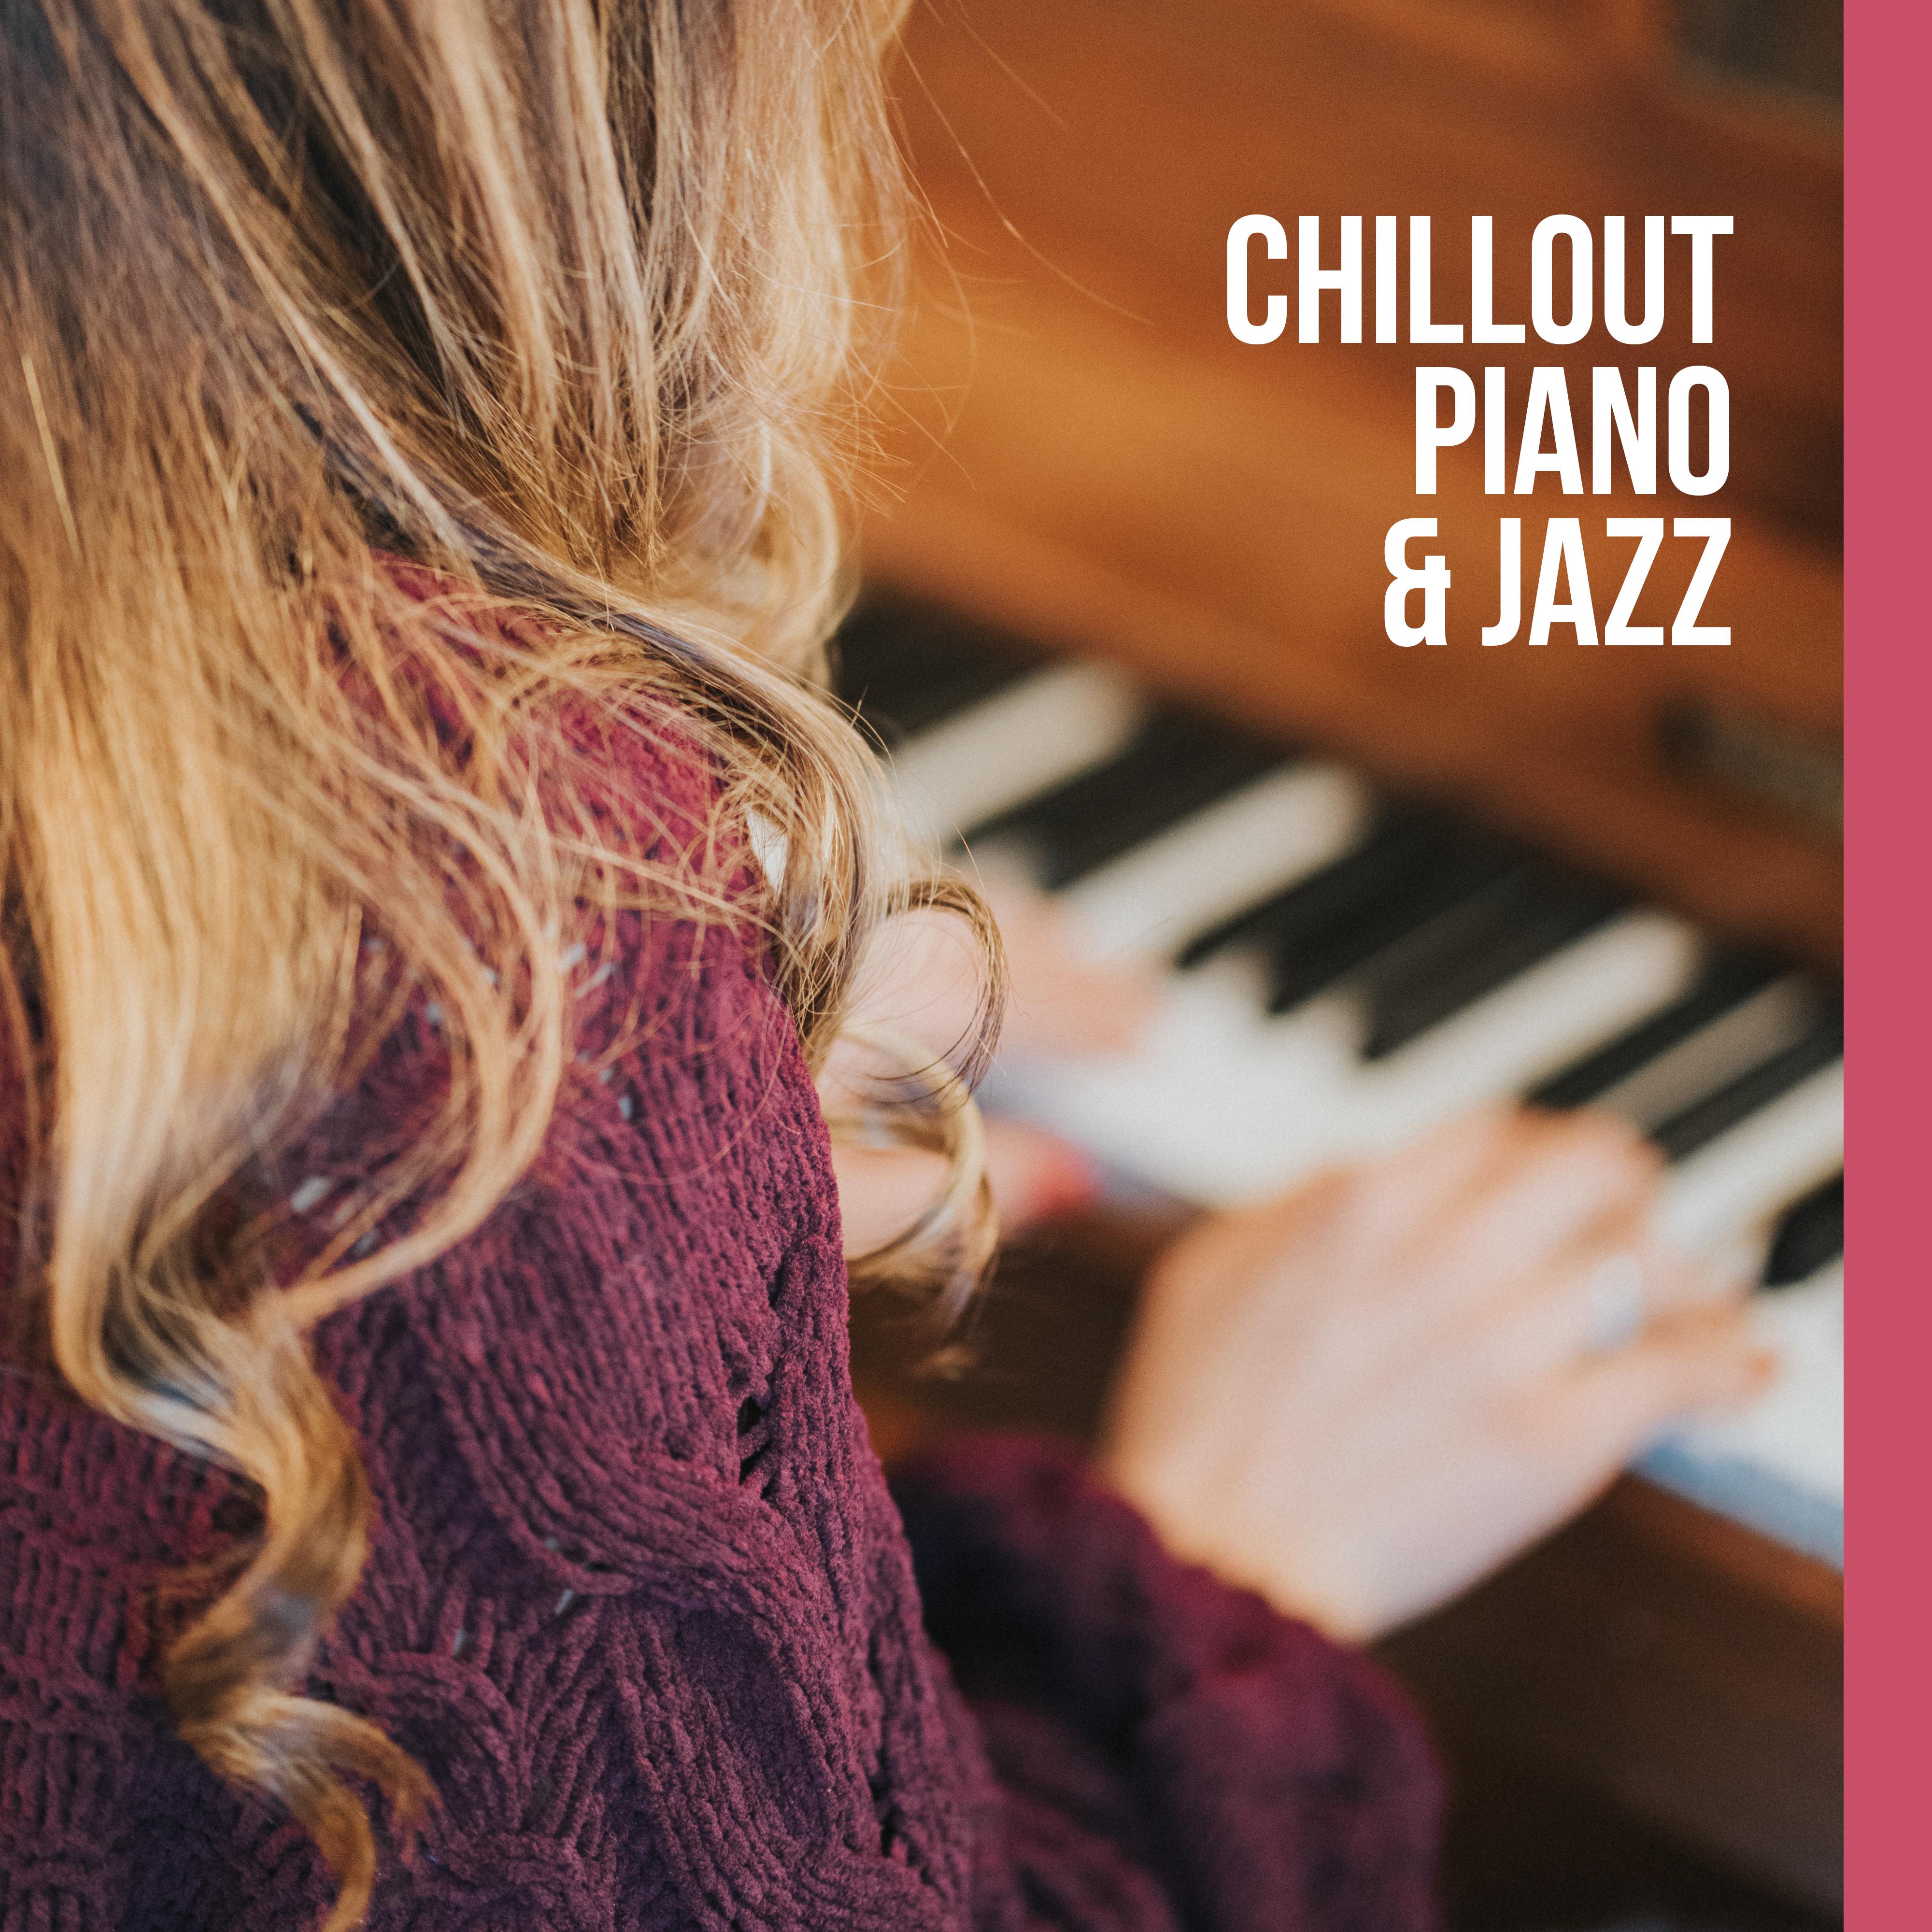 Chillout Piano & Jazz – Soft Jazz, Relaxing Jazz Vibes, Piano Music, Mellow Jazz After Work, Instrumental Jazz Music Ambient